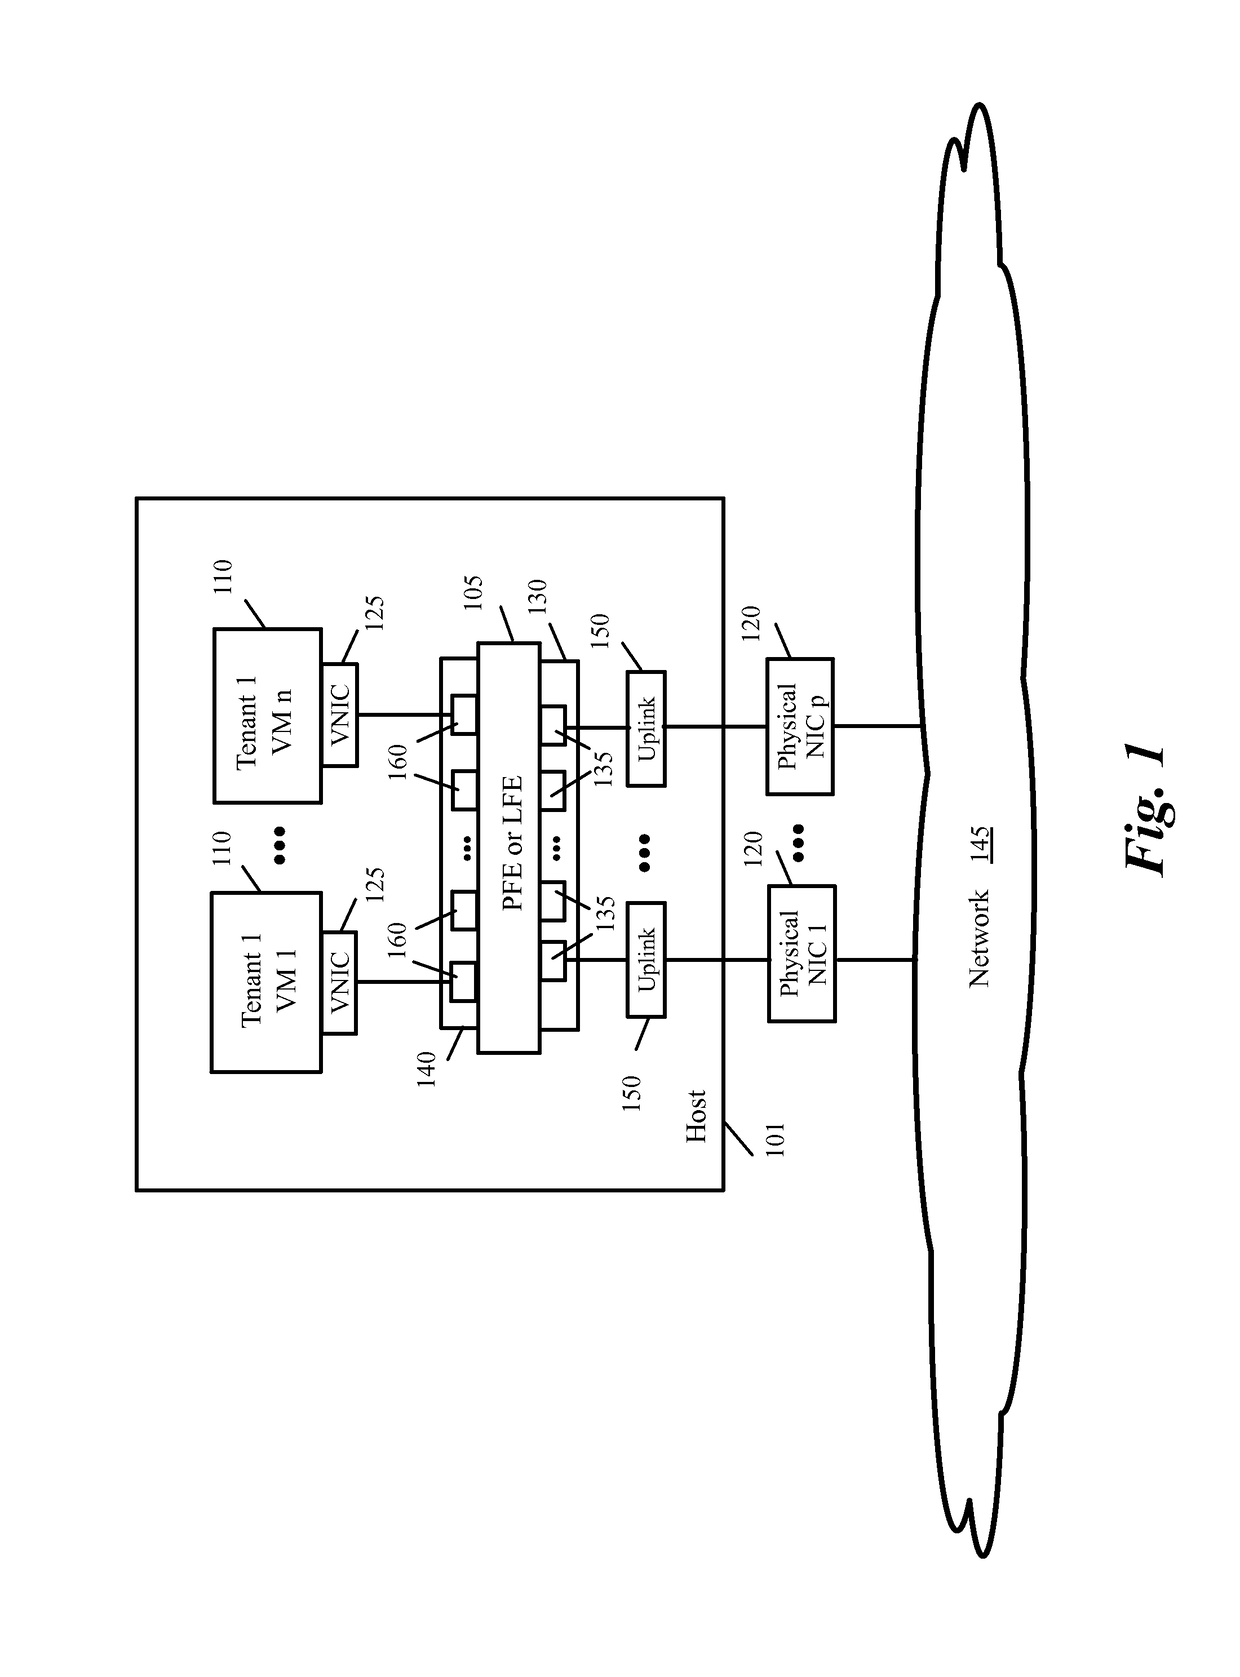 System for aggregating statistics associated with interfaces